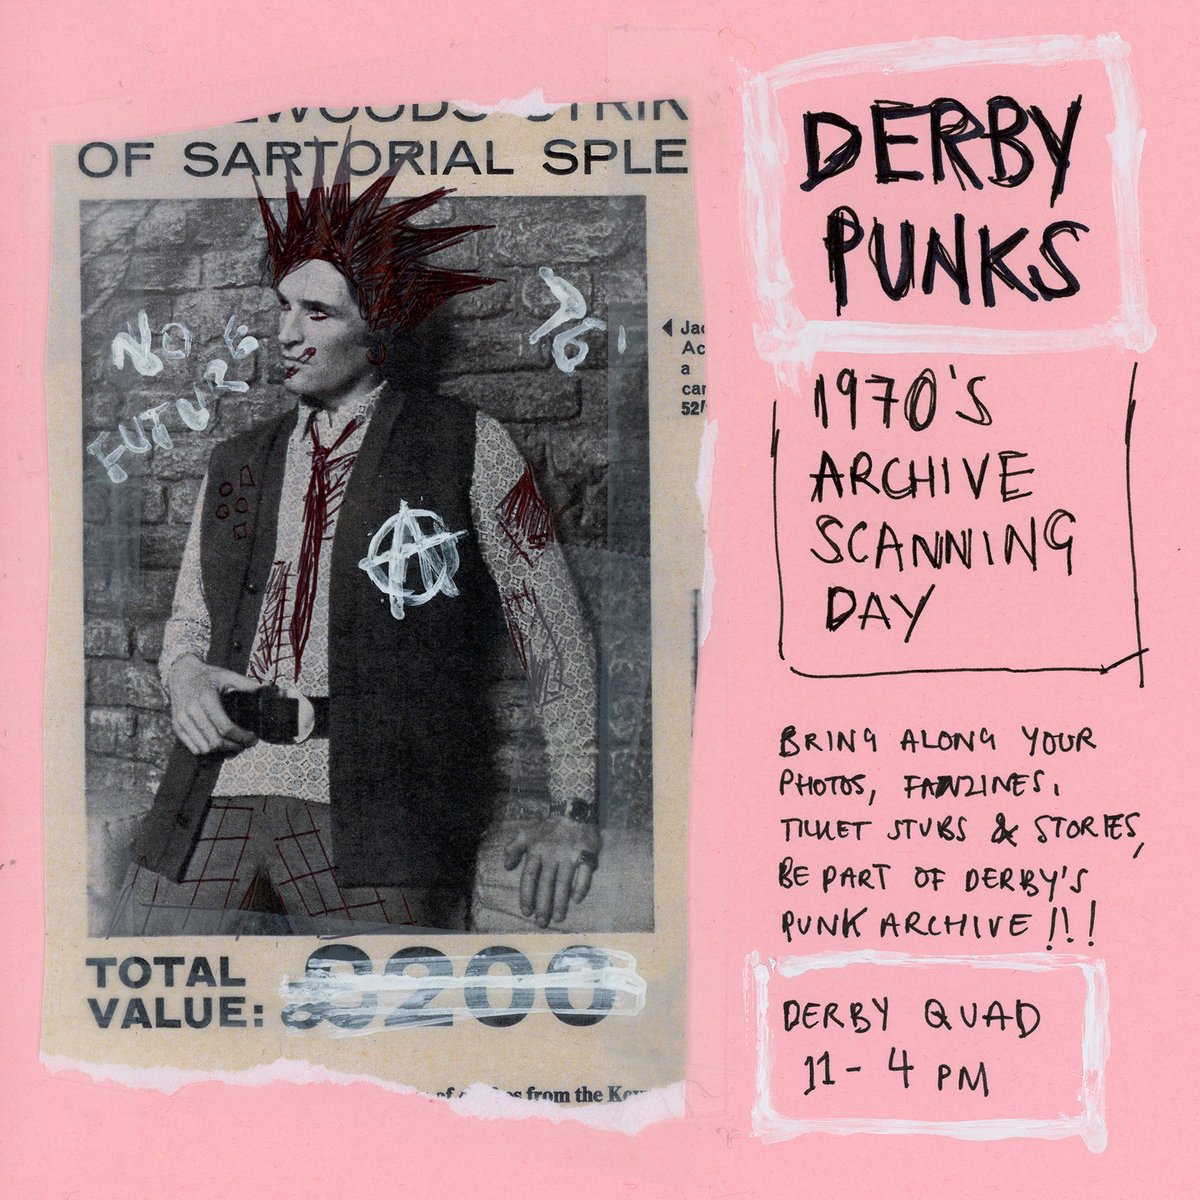 CALLUNG ALL DERBY PUNKS Have you got any photos of yourself and friends in Derby, gigs, fanzines, posters, badges, clothing or ticket stubs from the '70s & '80s? We want to preserve it in the social archive! Saturday 16th March QUAD @heritagefunduk @derbyquad @dedaderby